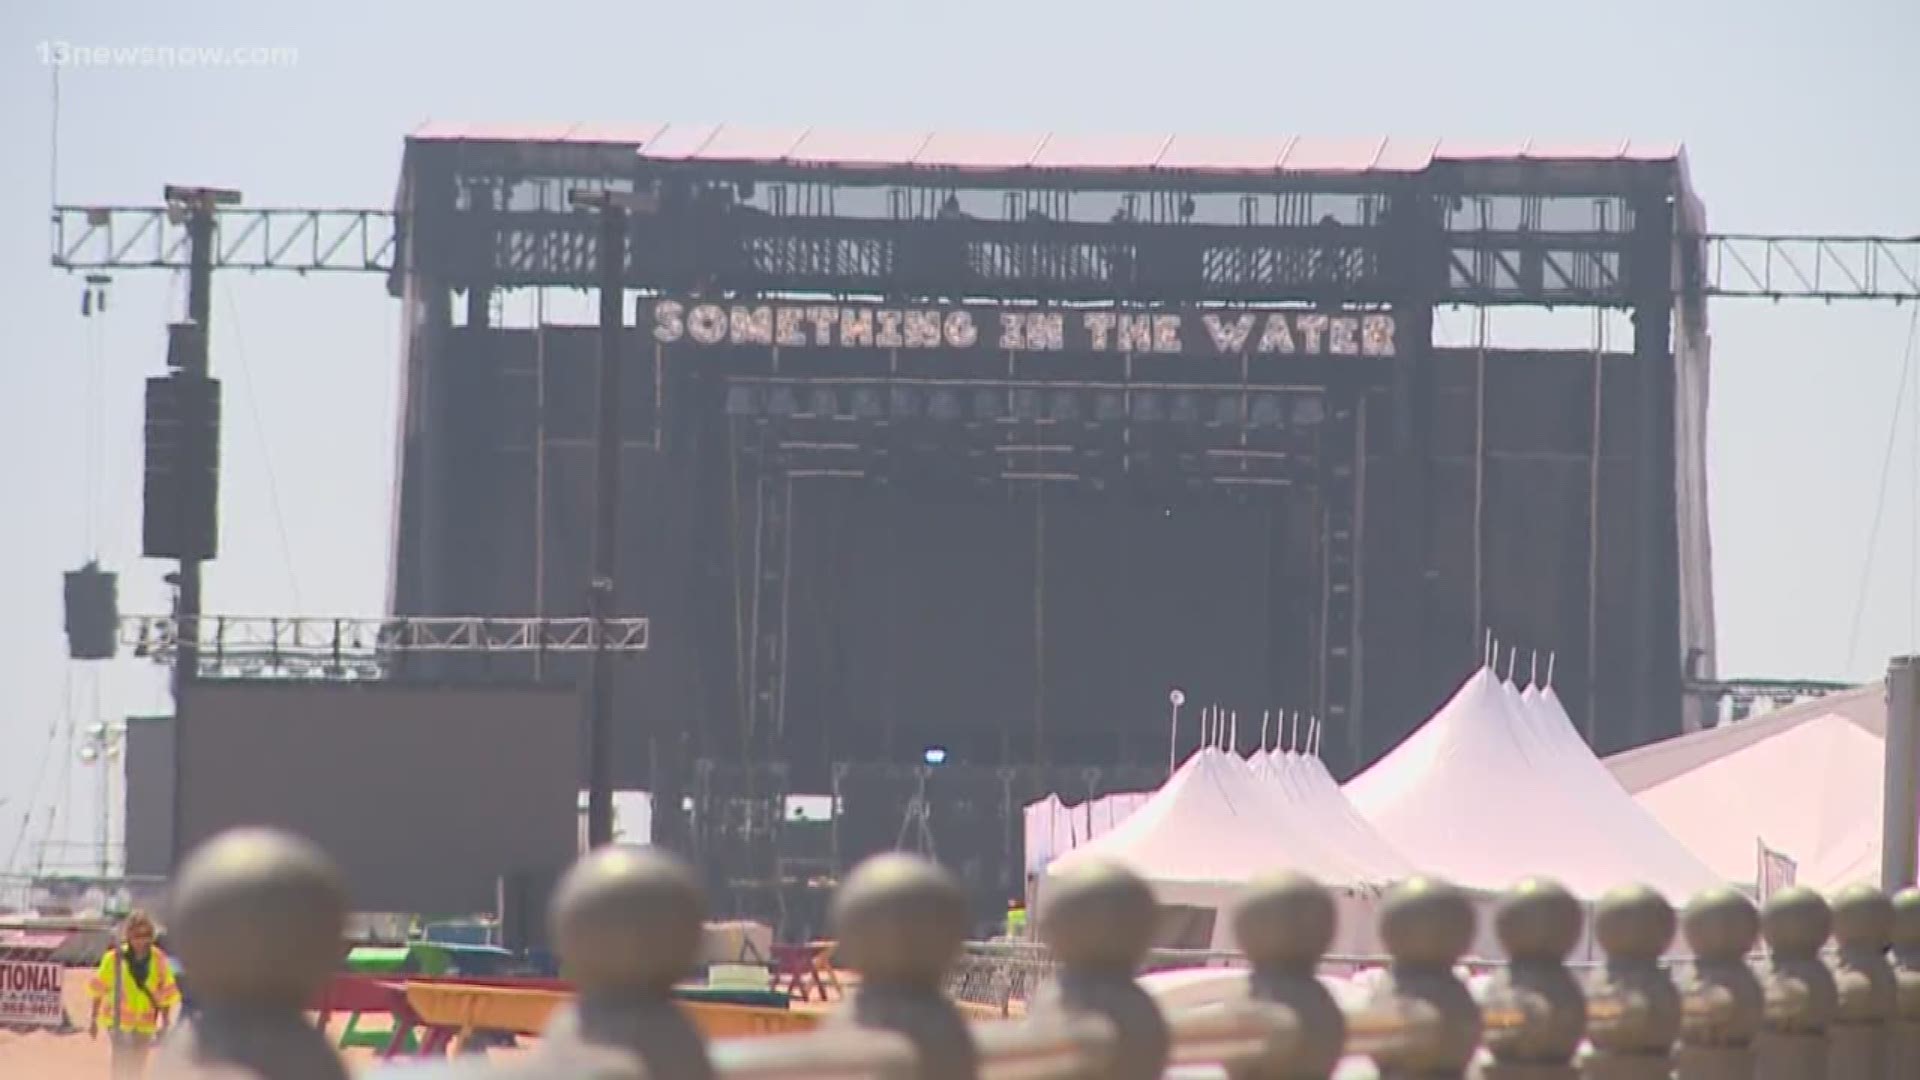 Things are starting to come together at the Oceanfront as organizers prepare for what's expected to be the largest event in Virginia Beach's history.